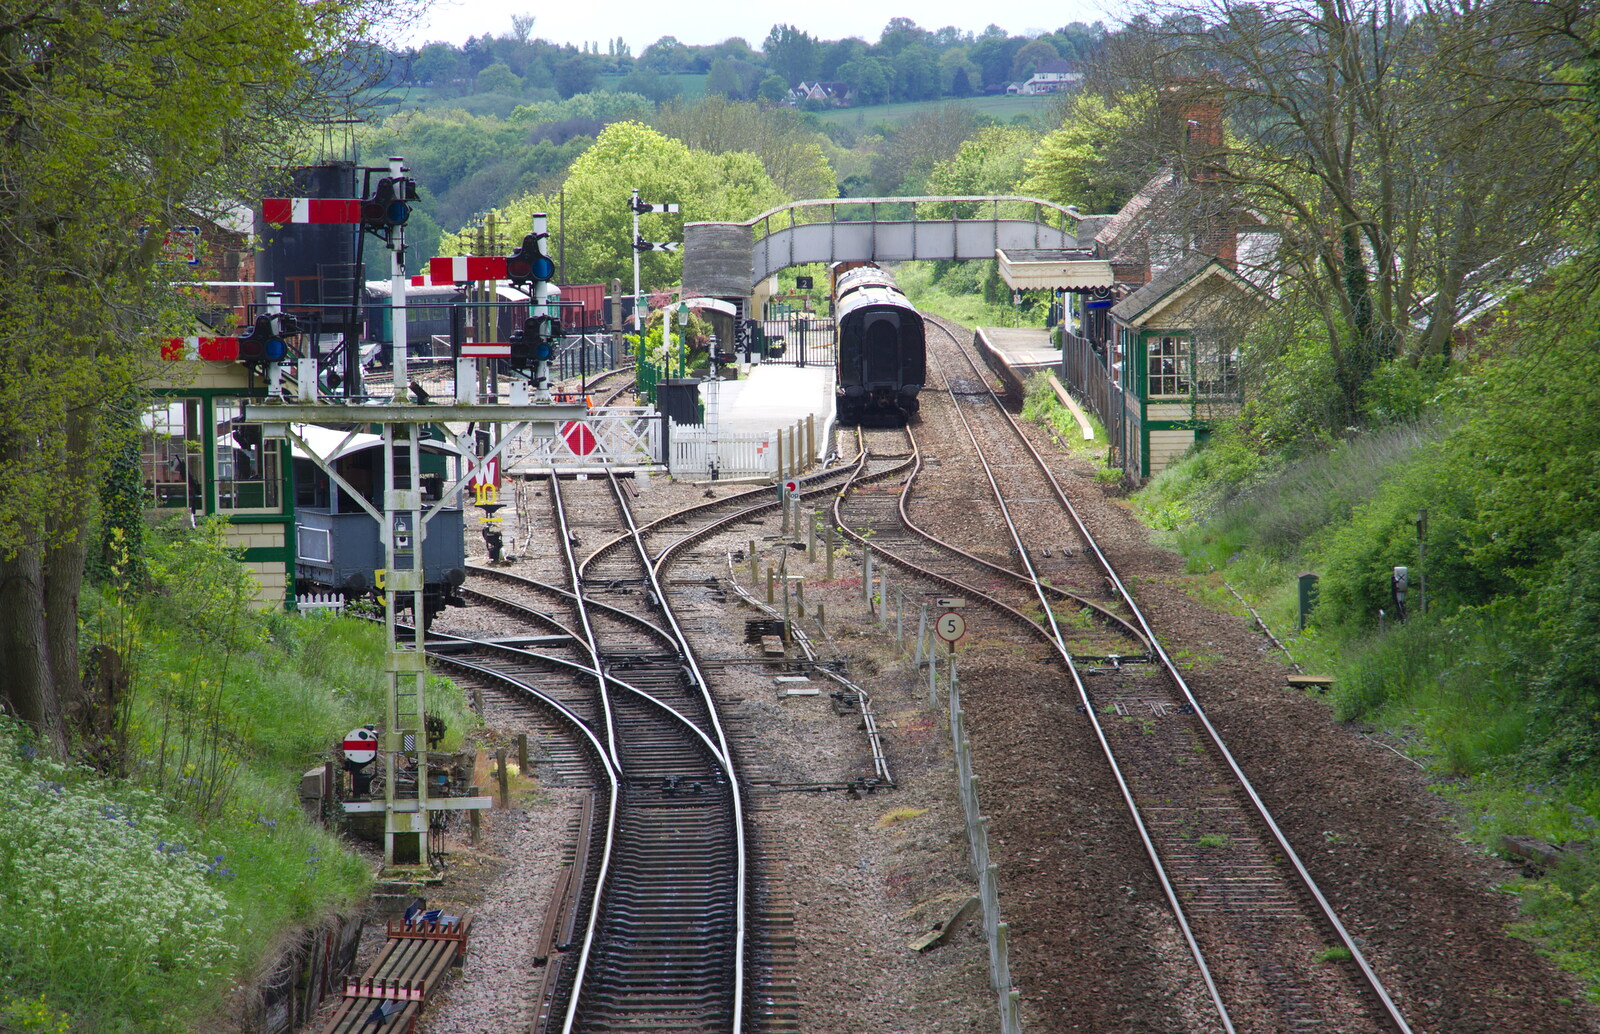 Chappel and Wakes Colne railway station from The BSCC Bike Ride 2019, Coggeshall, Essex - 11th May 2019